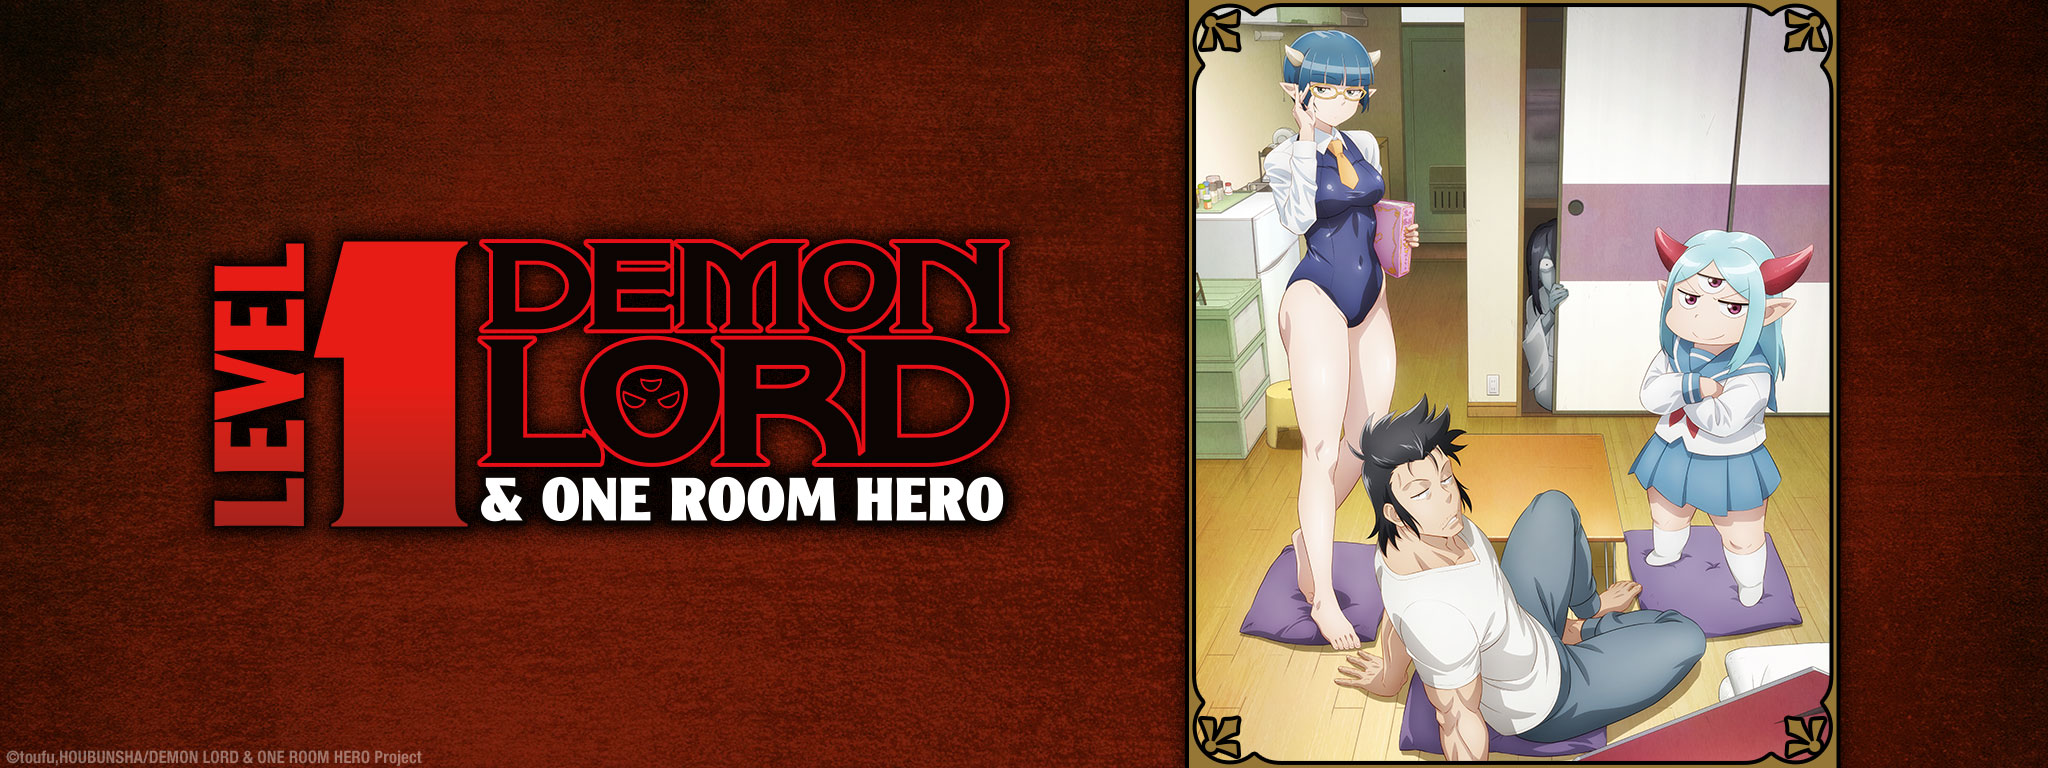 Level 1 Demon Lord and One Room Hero Gets New Trailer, Key Visual